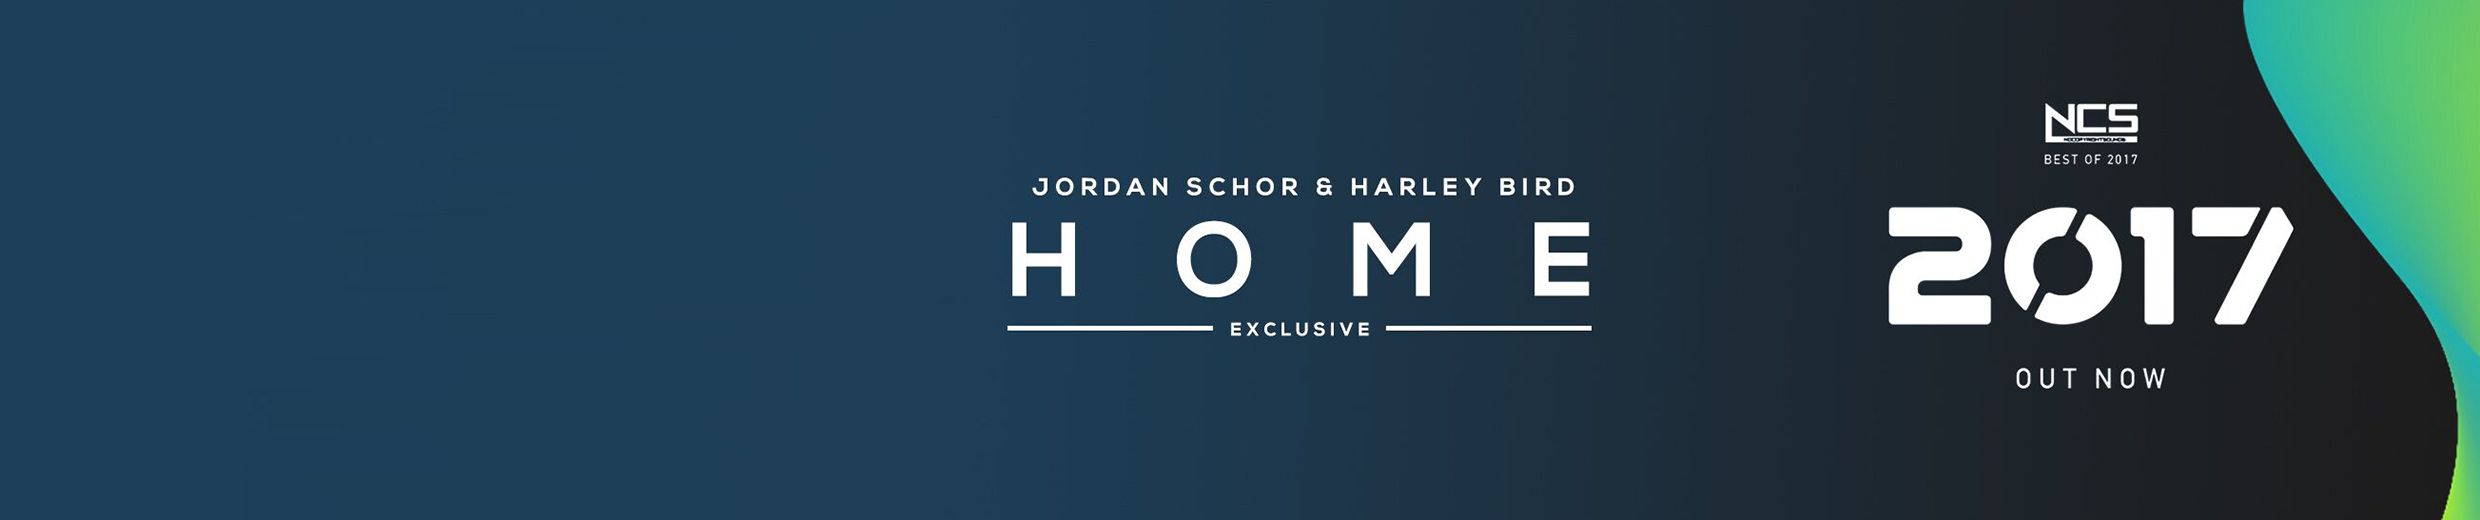 Stream Jordan Schor music | Listen to albums, playlists for free on SoundCloud